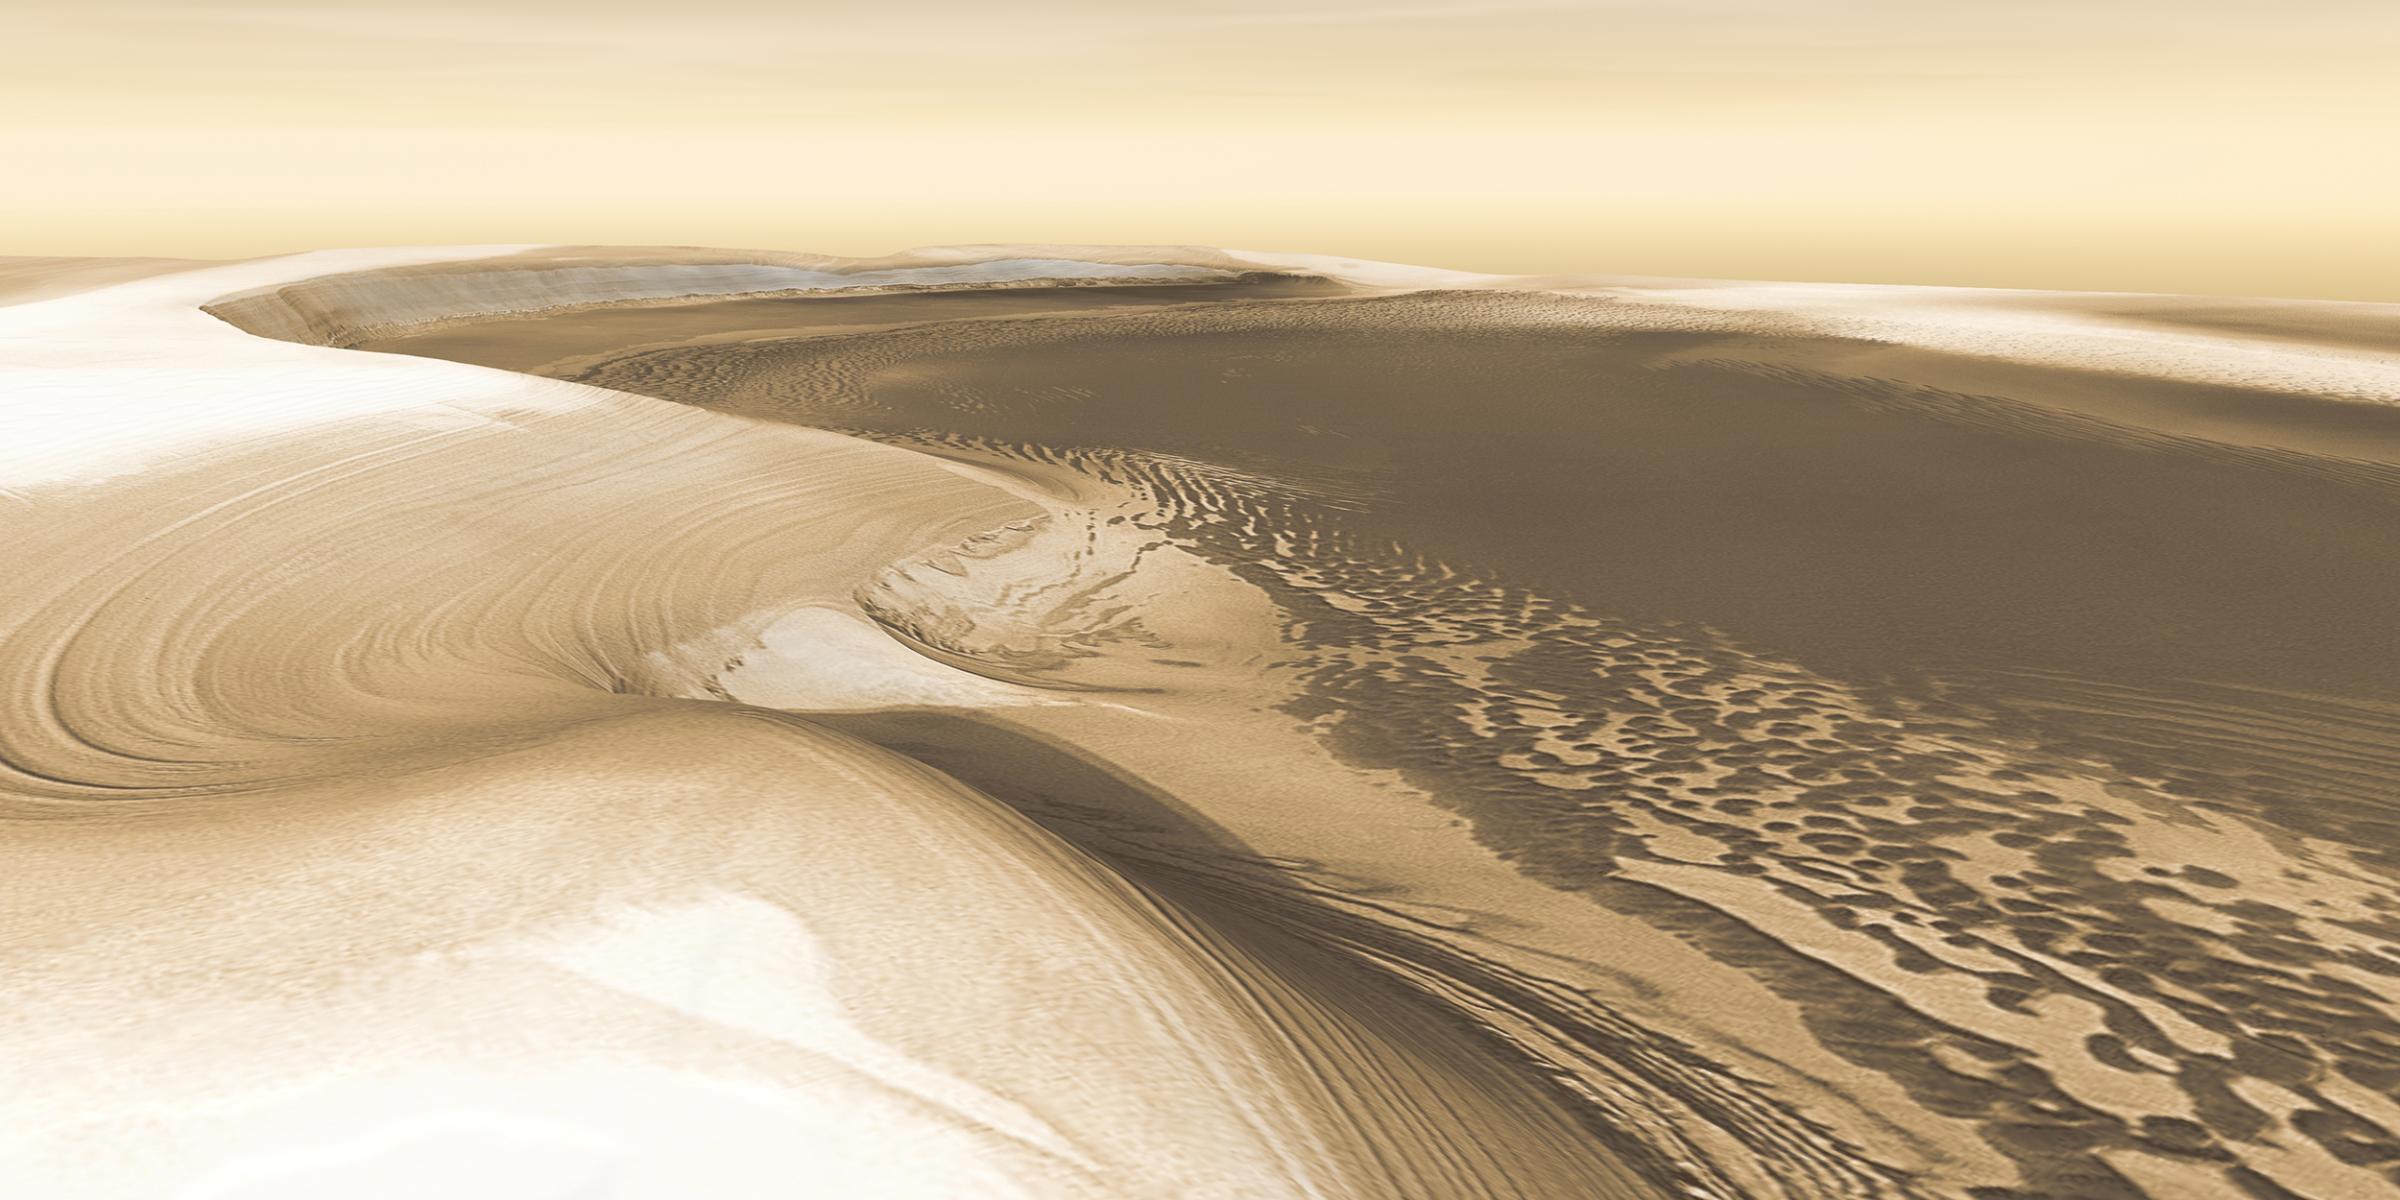 Chasma Boreale: A long, flat-floored valley that cuts deep into Mars' north polar icecap. Its walls rise about 4,600 feet above the floor. Where the edge of the ice cap has retreated, sheets of sand are emerging that accumulated during earlier ice-free climatic cycles. Winds blowing off the ice have pushed loose sand into dunes and driven them down-canyon in a westward direction, toward our viewpoint. This scene combines images taken during the period from Dec. 2002 to Feb. 2005 by the Thermal Emission Imaging System instrument on NASA's Mars Odyssey orbiter.